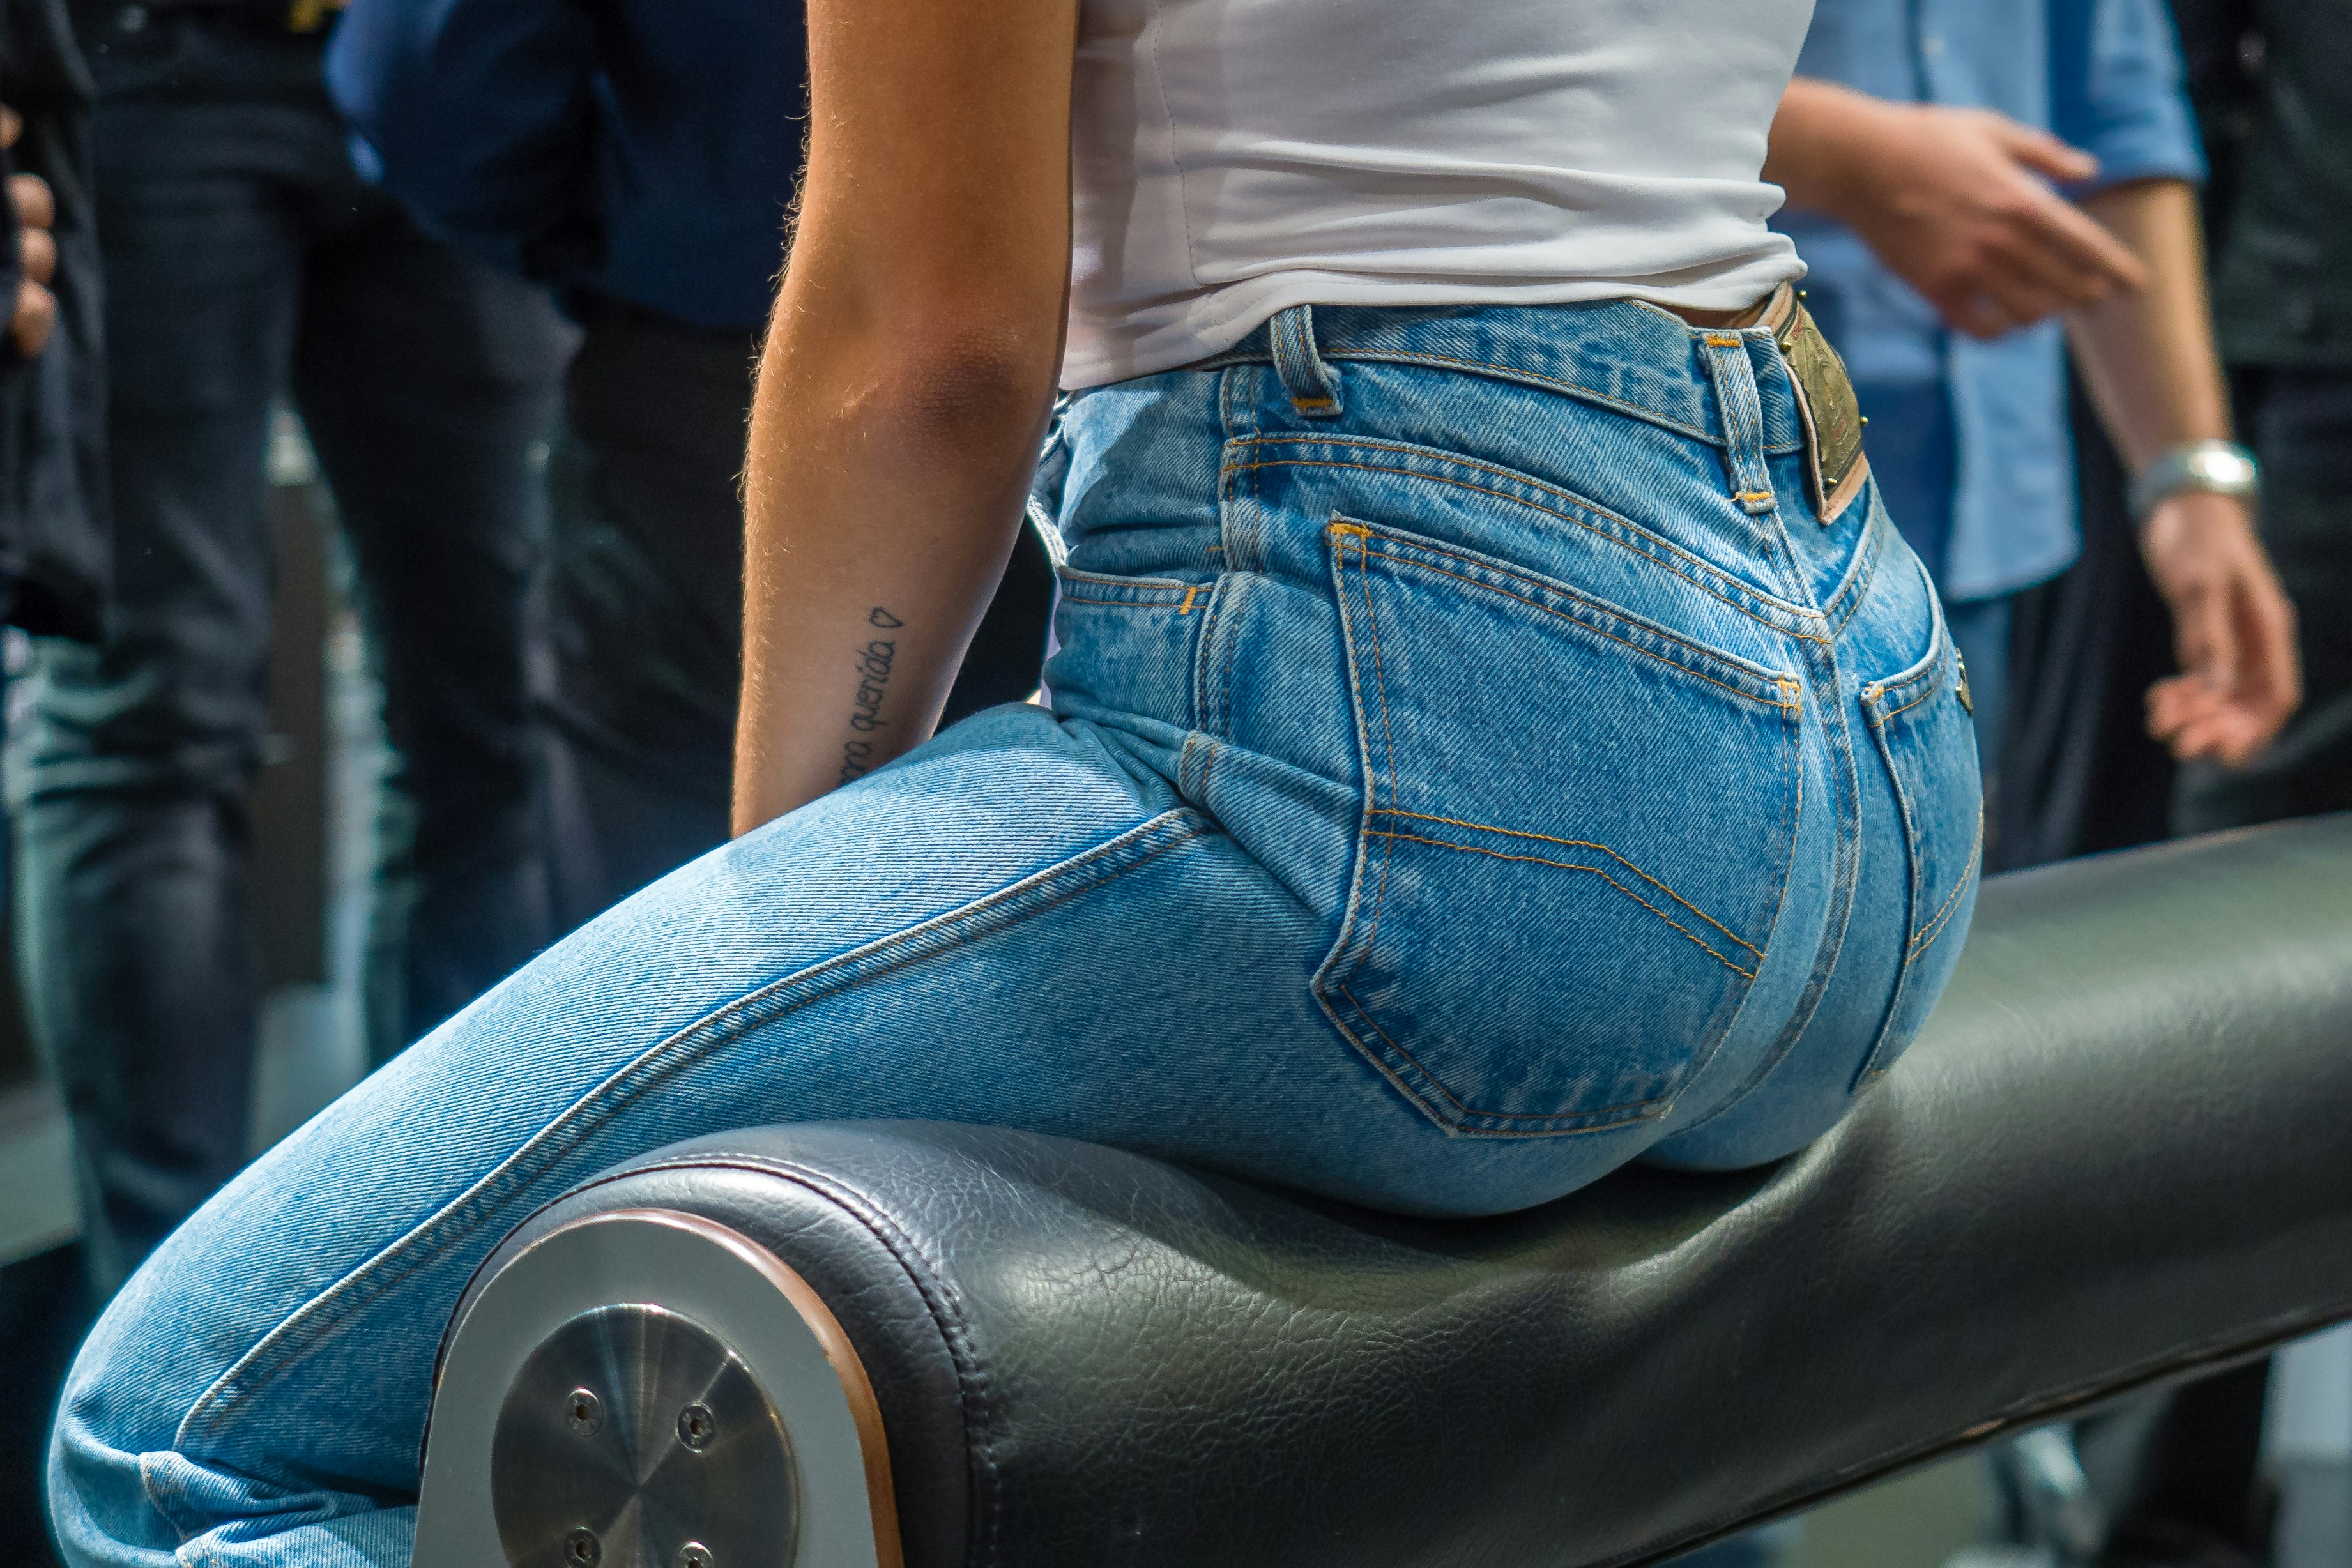 Teen Butts In Jeans